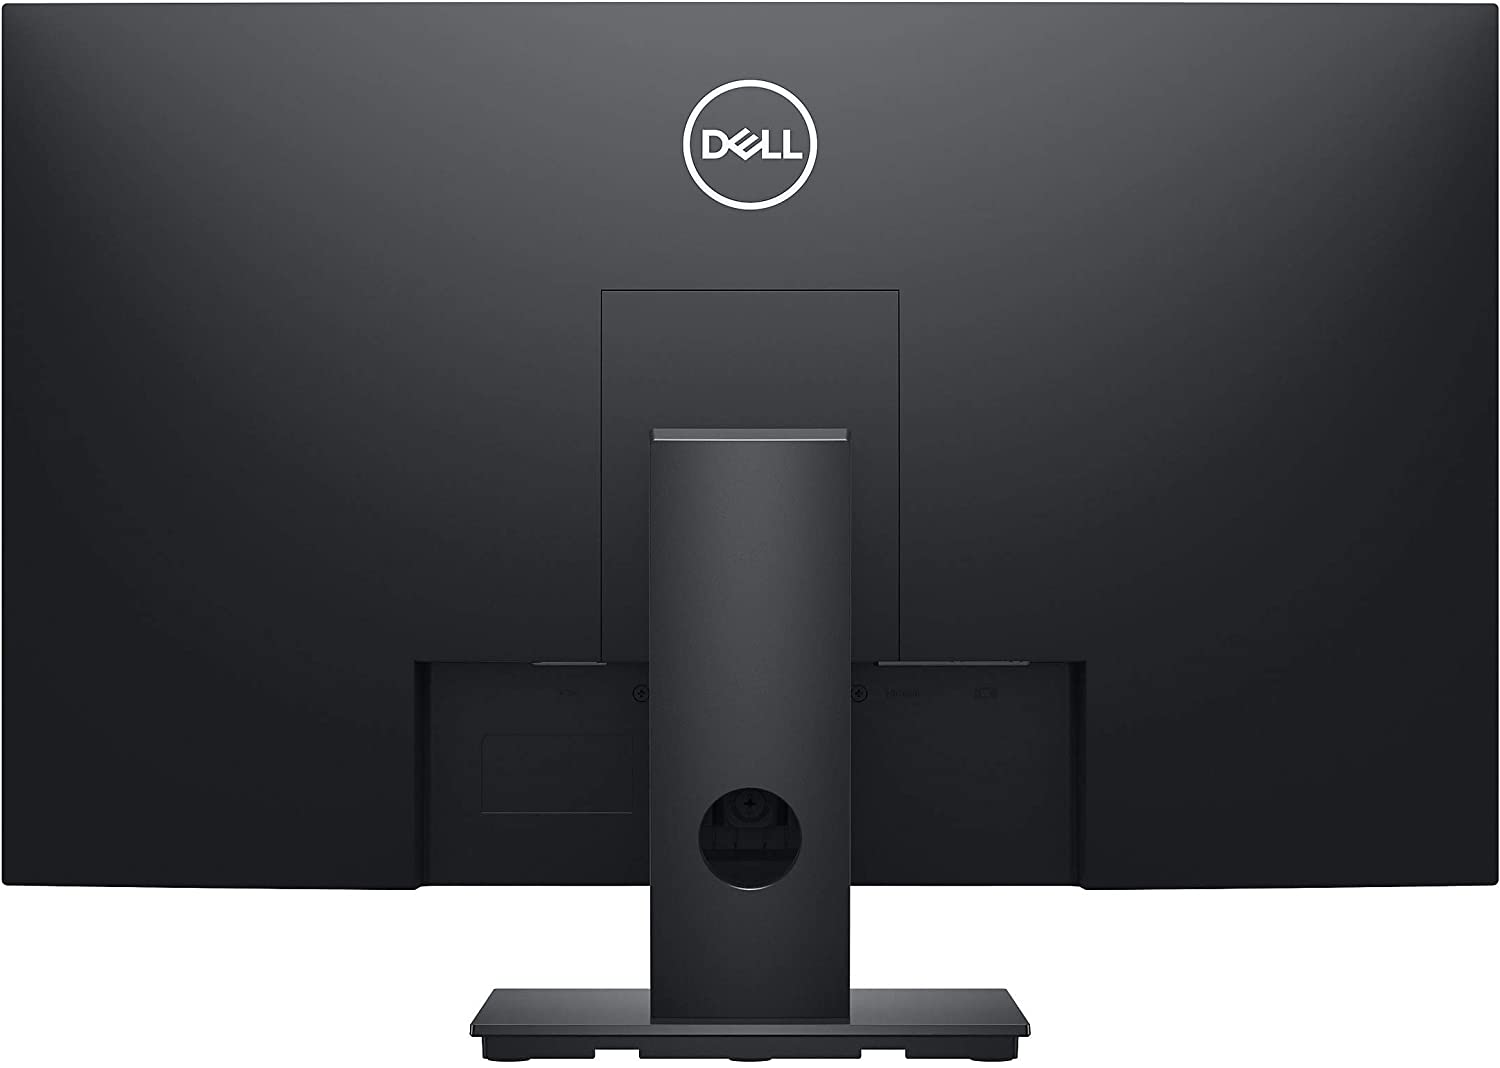 Dell E2720H 27" LCD Anti-Glare Monitor - 1920 x 1080 Full HD Display - 60 Hz Refresh Rate - VGA & HDMI Input Connectors - LED Backlight Technology - in-Plane Switching Technology